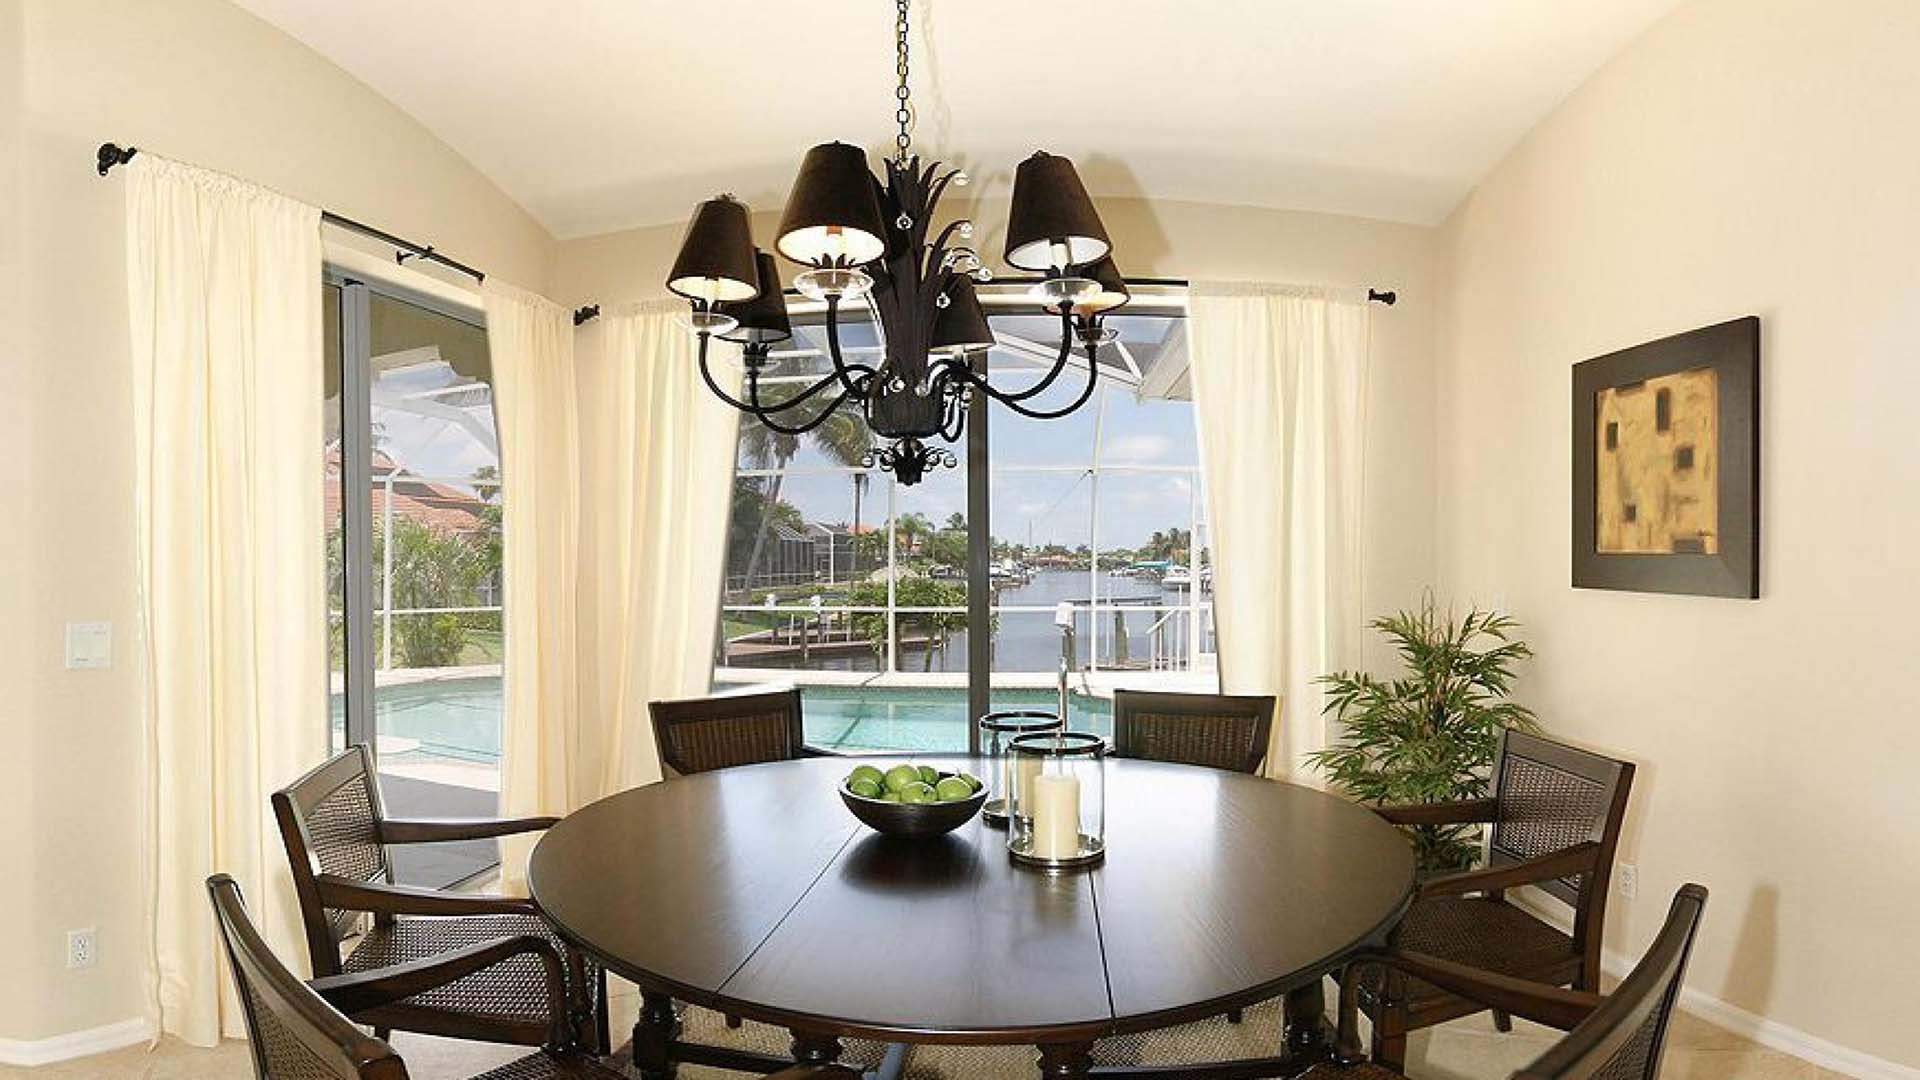 The dining area overlooks pool and sailboat canal